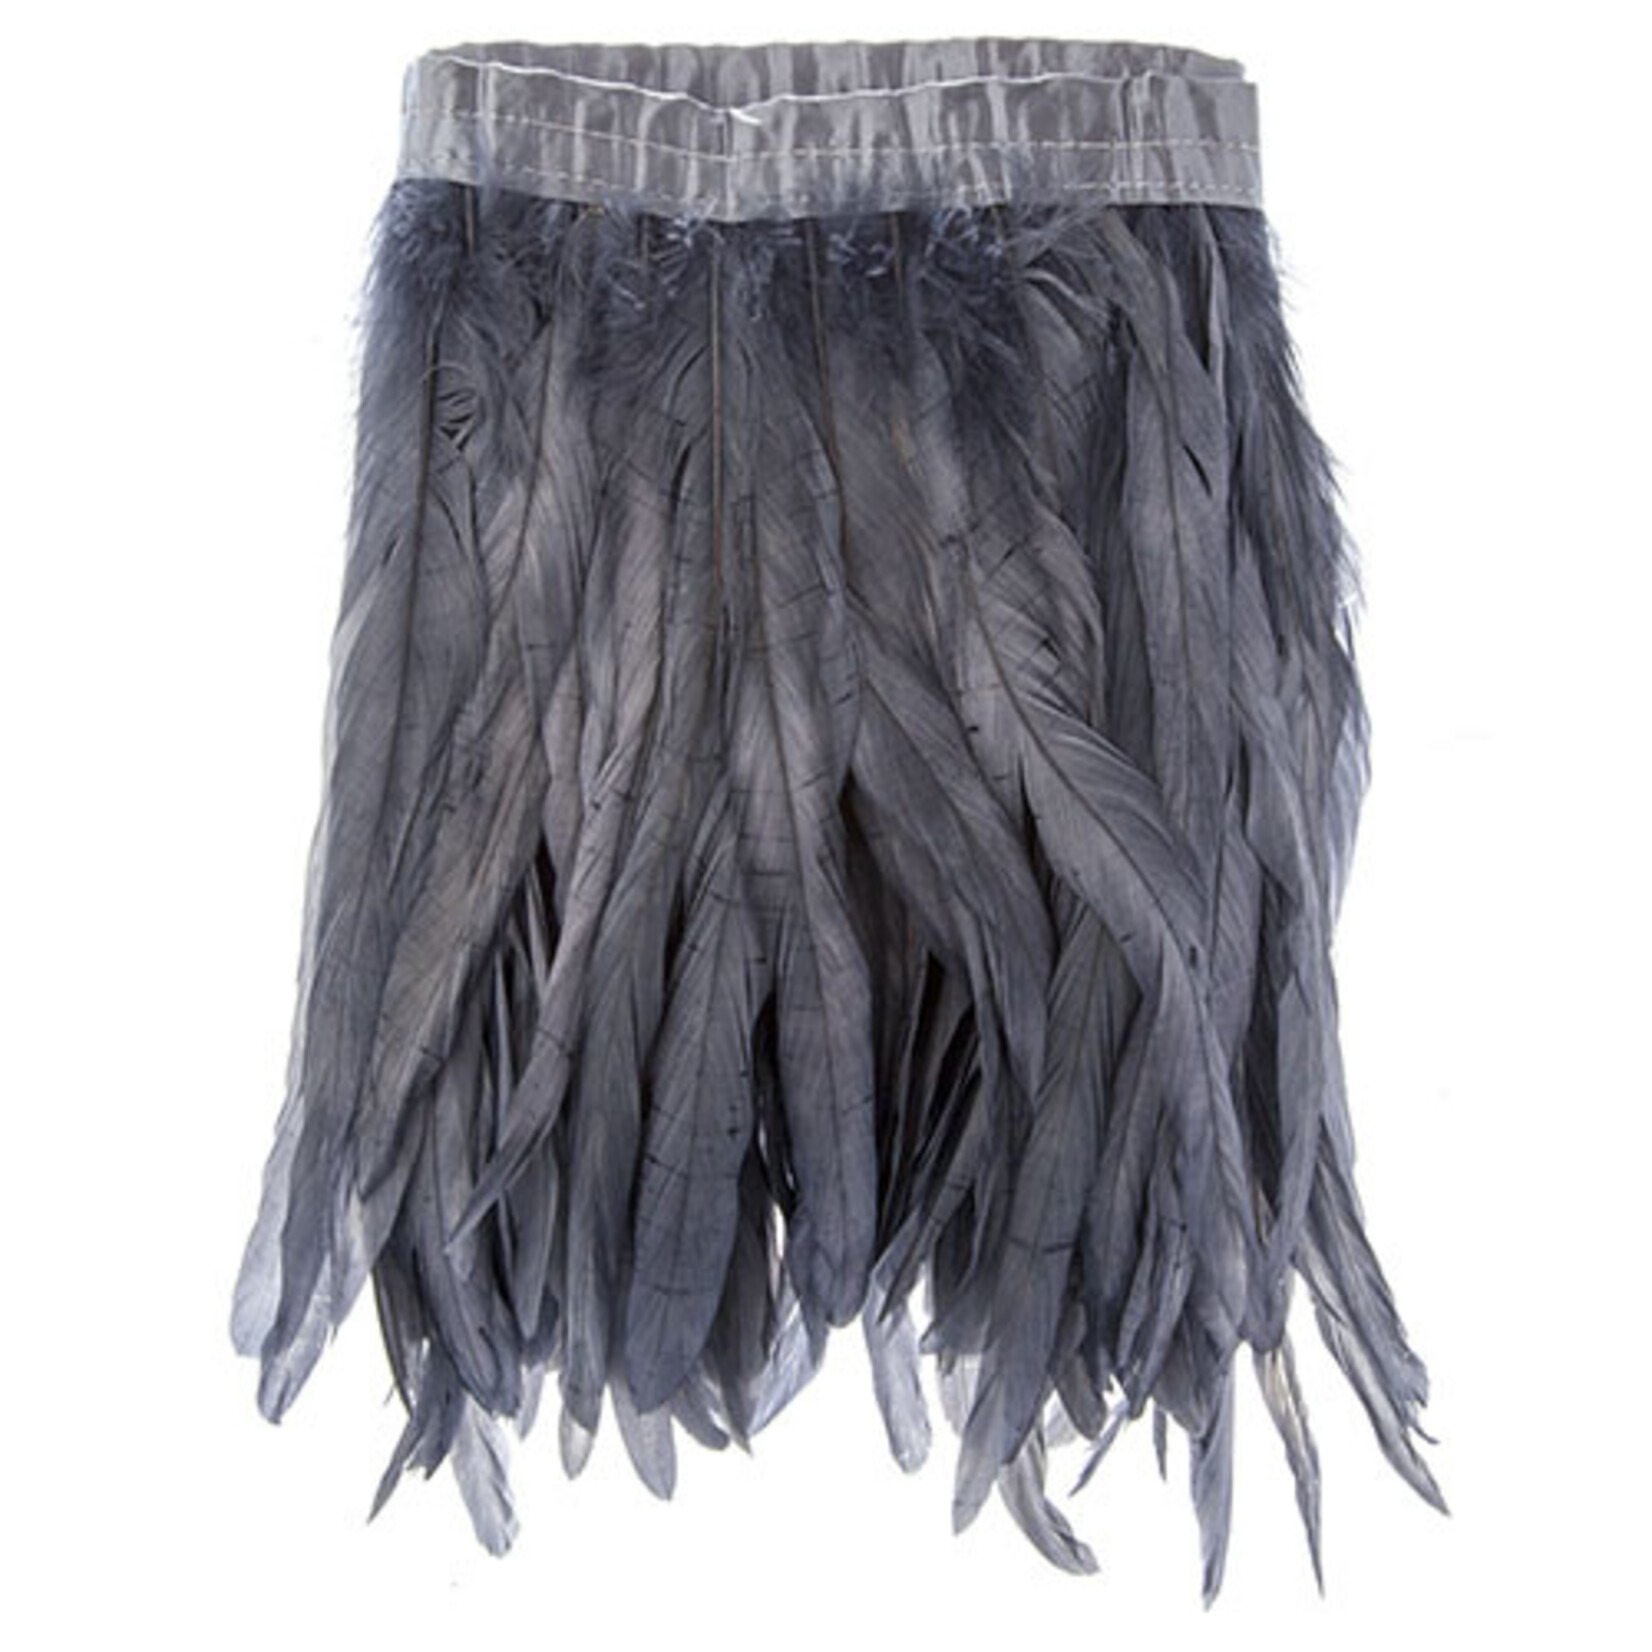 Coque Feathers Value 12-14 Inches Silver